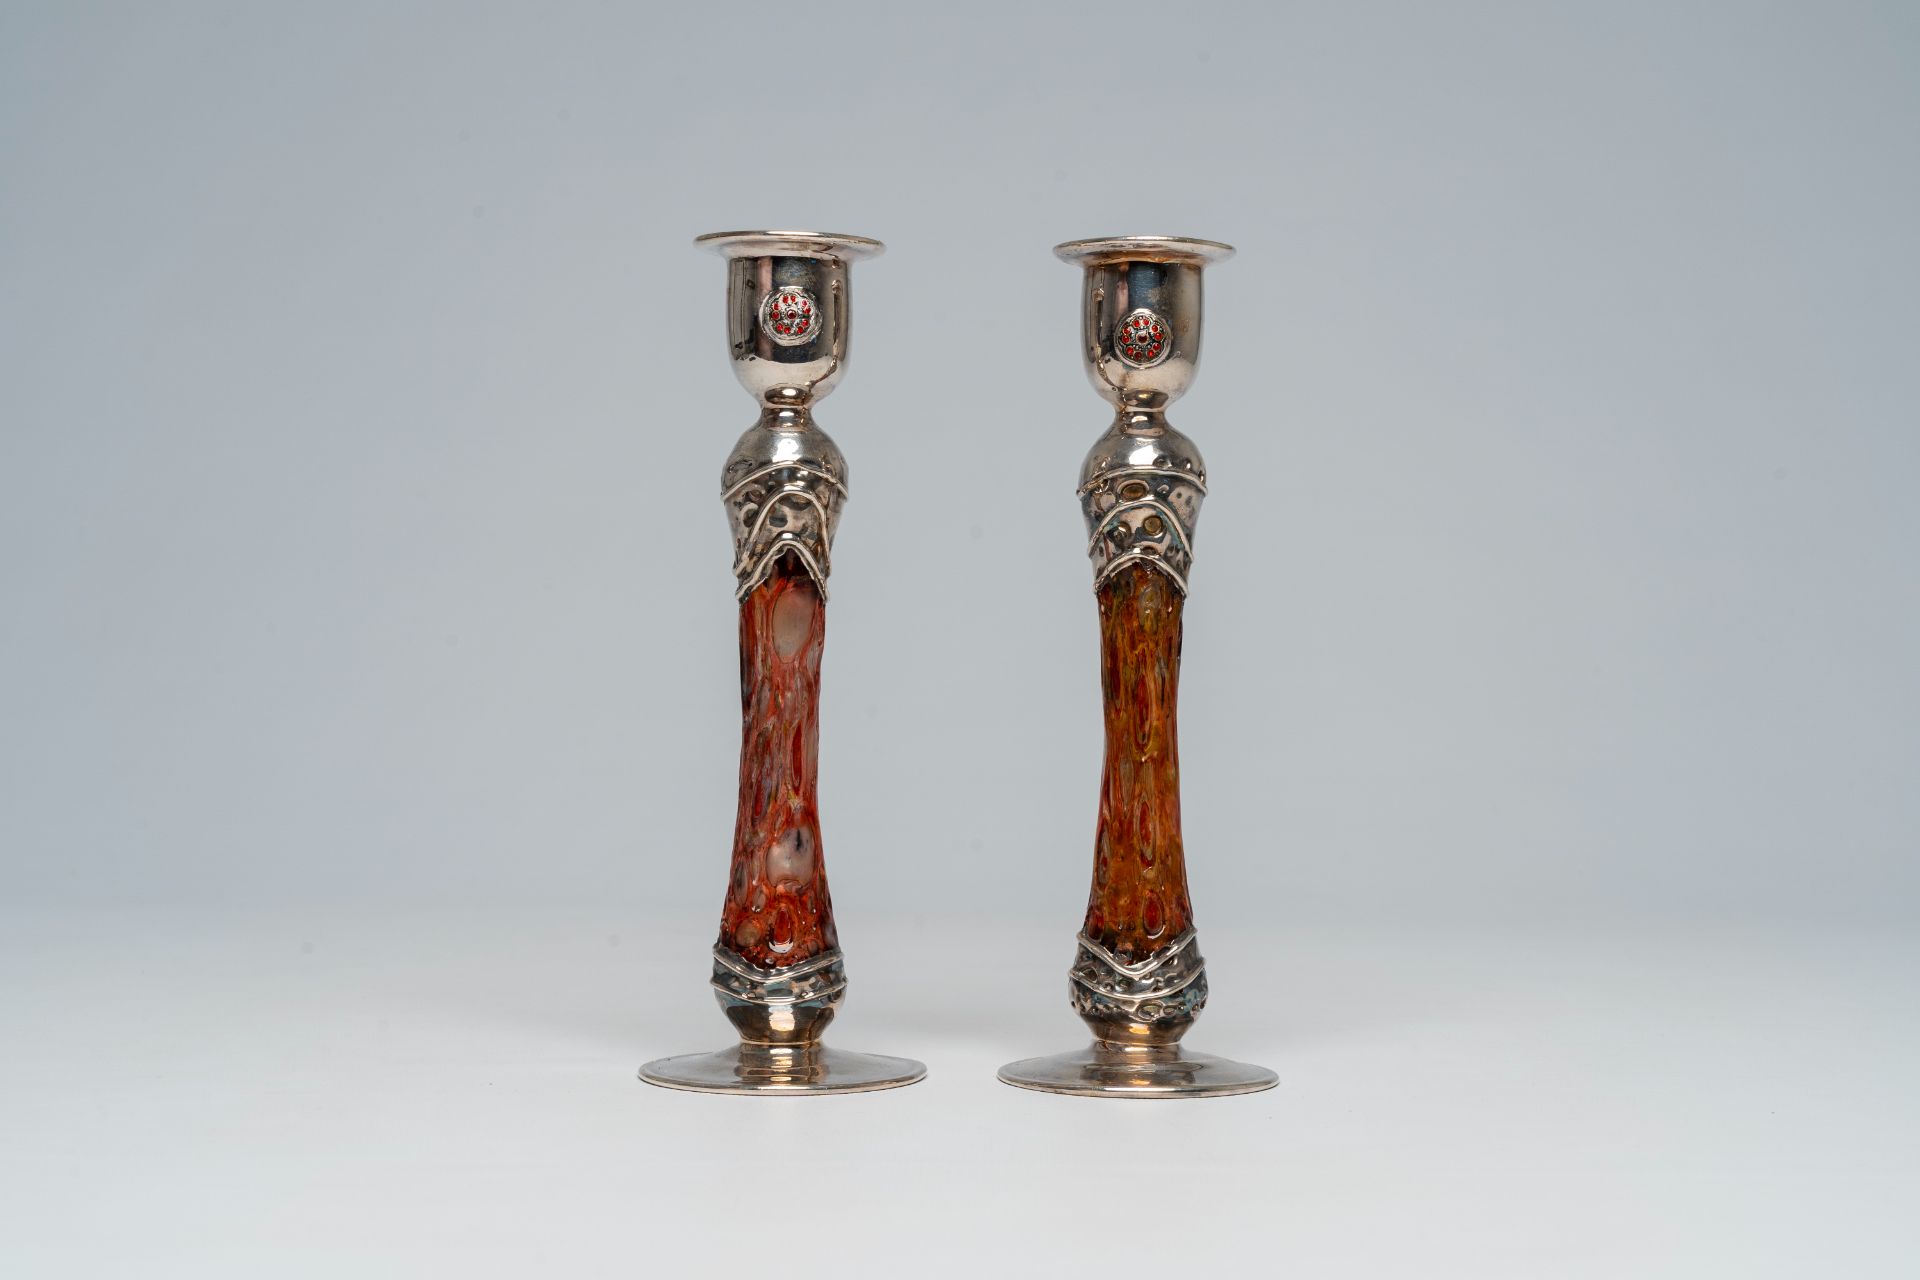 A pair of English or Scottish Arts & Crafts style silver and glass candlesticks, 20th C. - Image 2 of 11